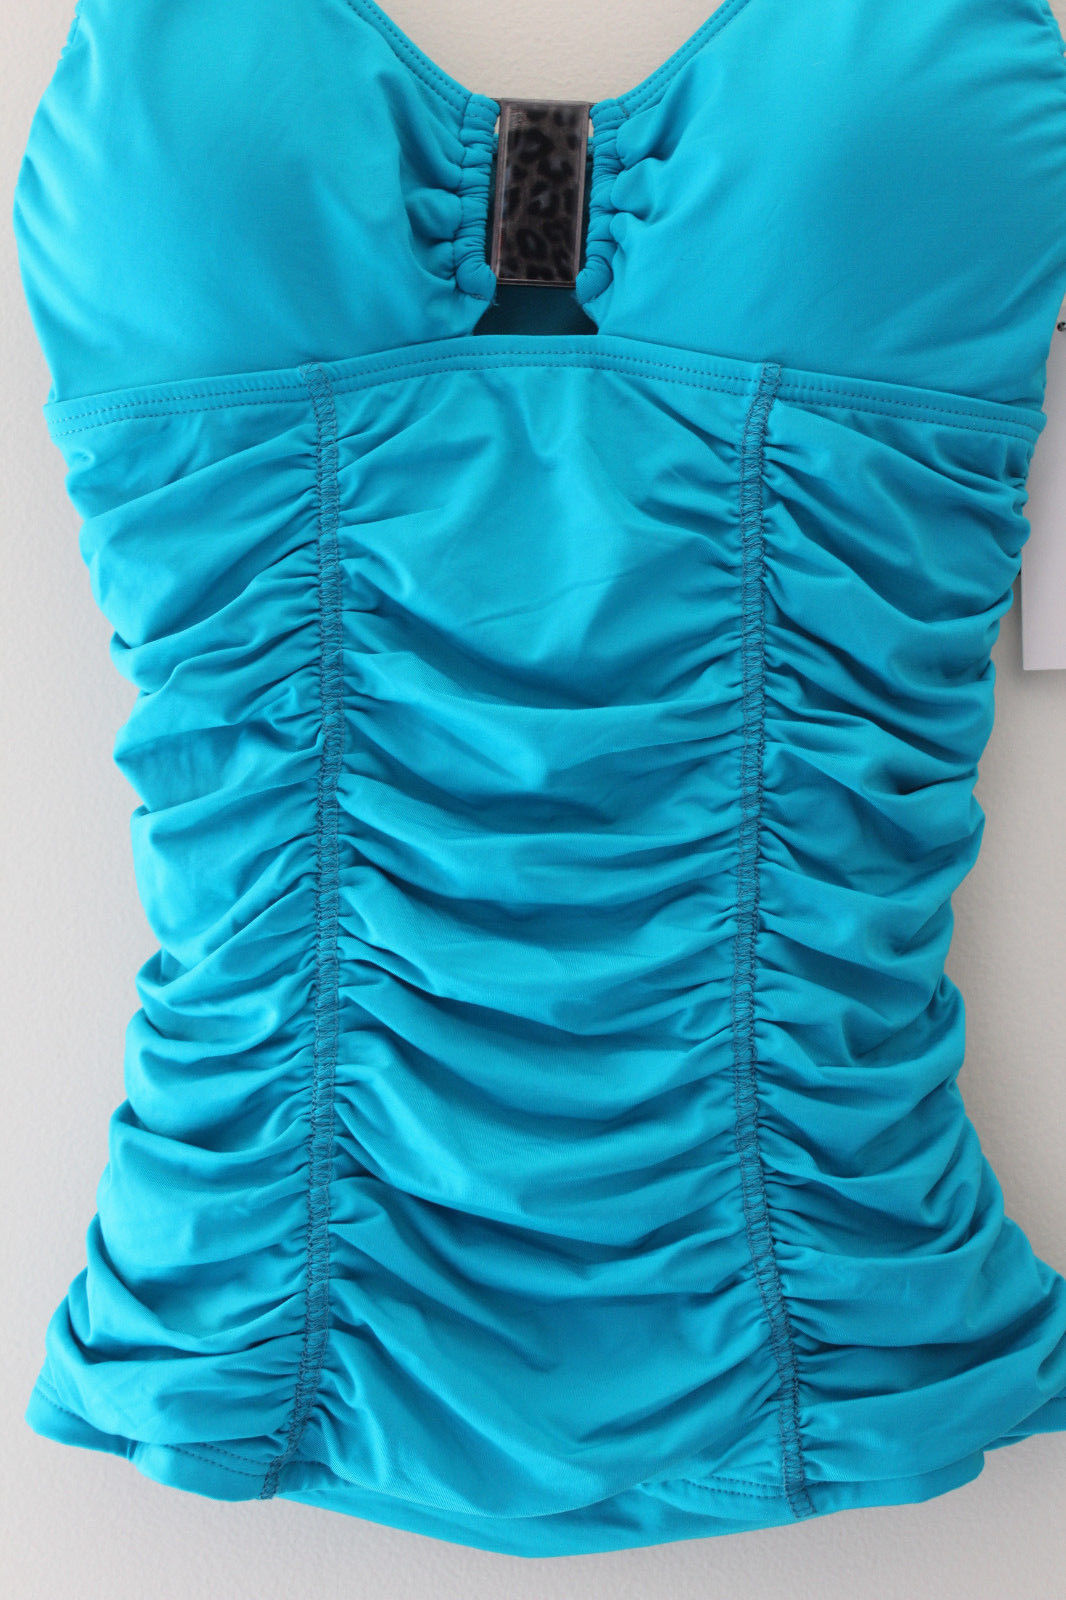 Primary image for NWT Kenneth Cole New York Smocked Turquoise Sexy Tankini Swim Suit Top S $75